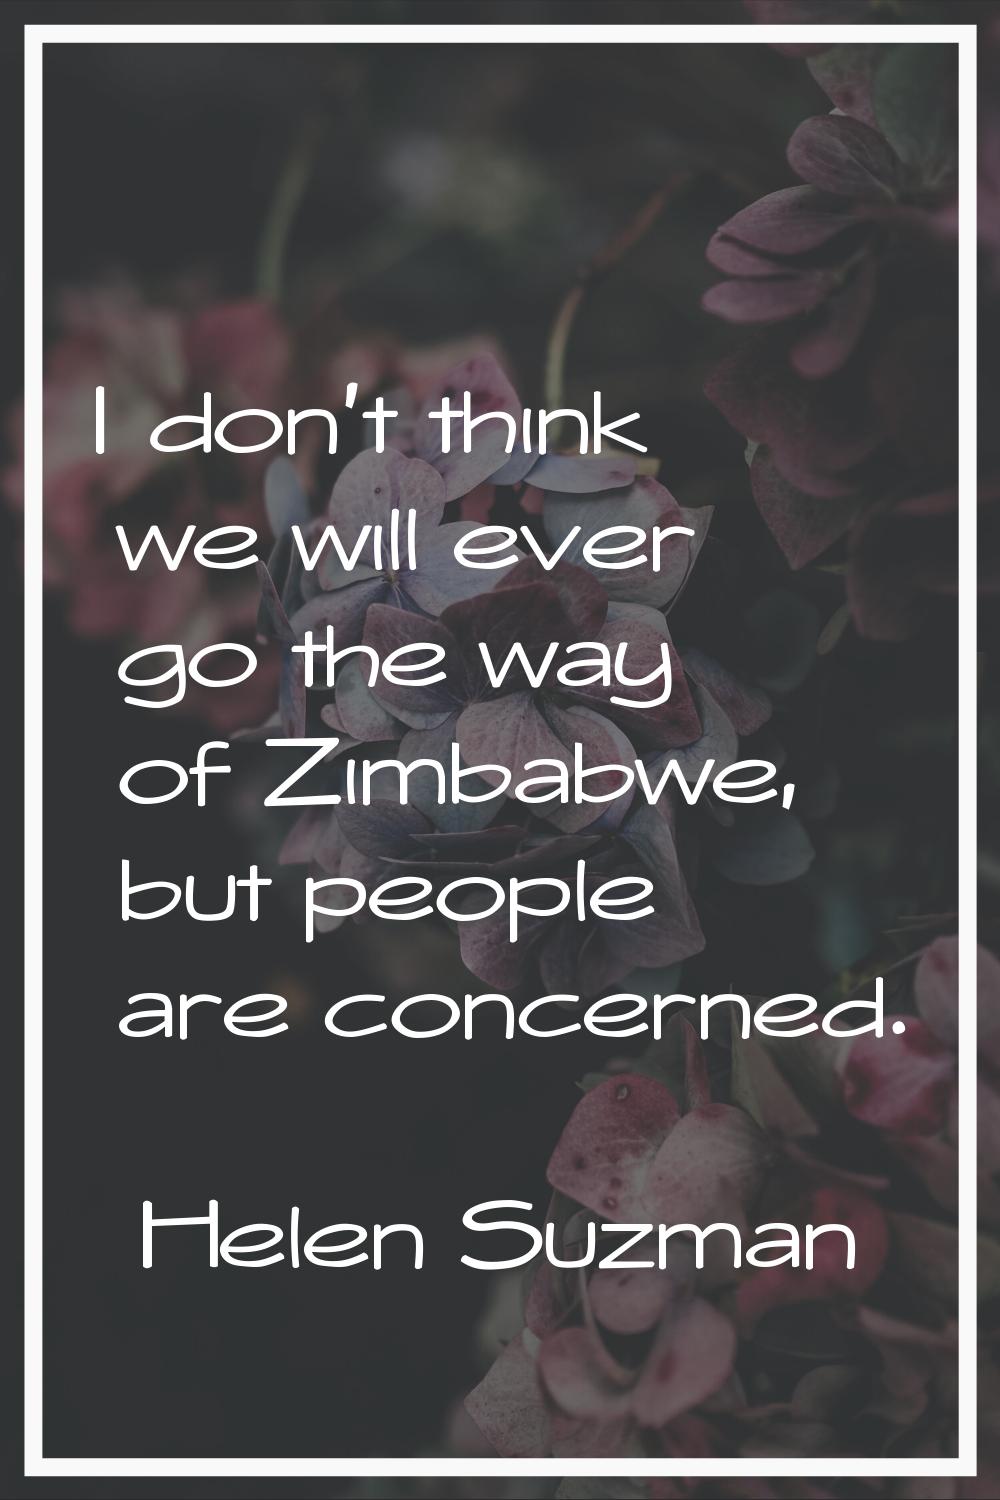 I don't think we will ever go the way of Zimbabwe, but people are concerned.